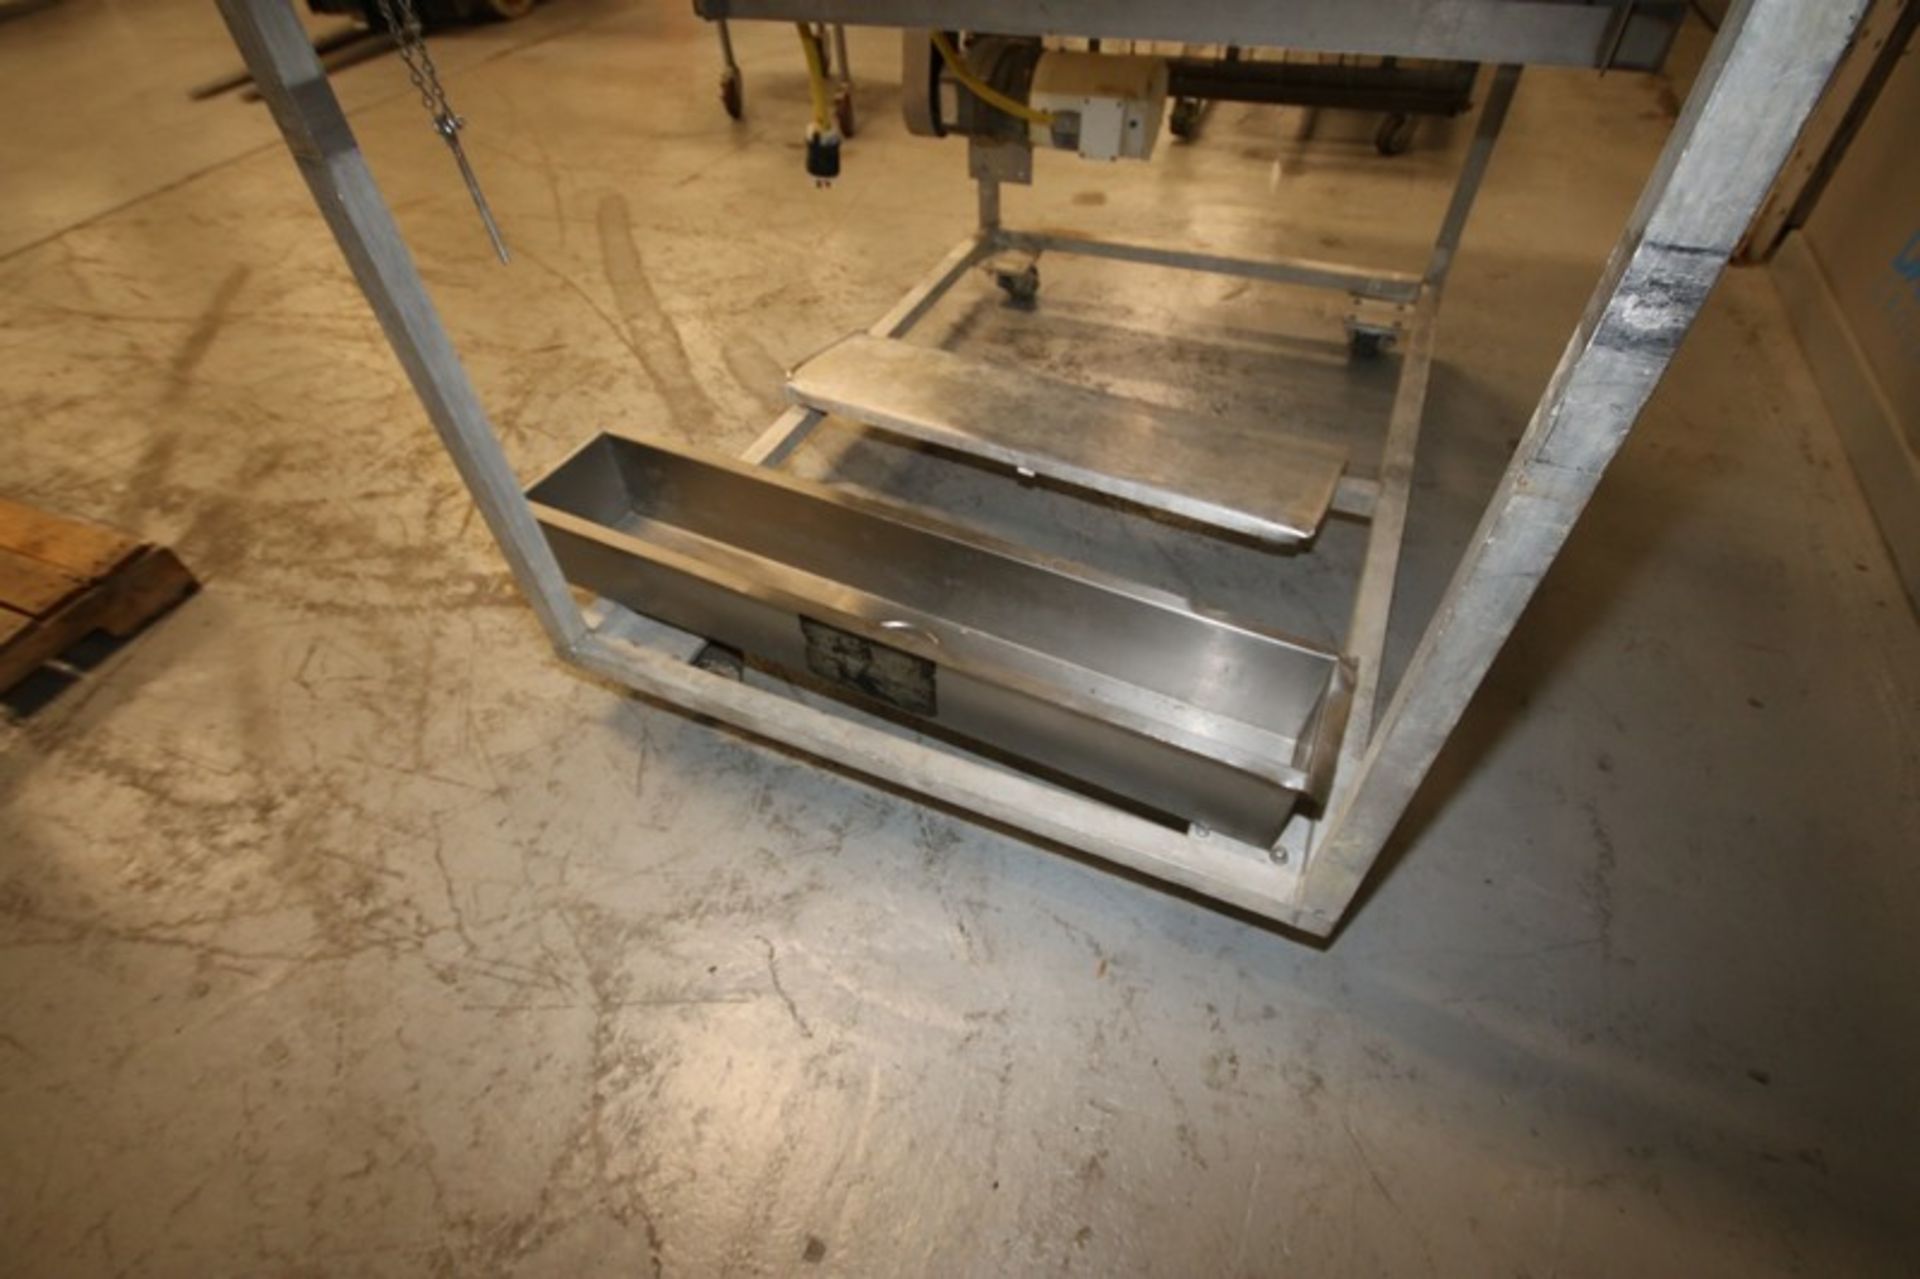 S/S Transfer Conveyor, with Conveyor Belt Aprox. 58" L x 36" W Plastic Belt, with S/S Mesh Infeed, - Image 5 of 7